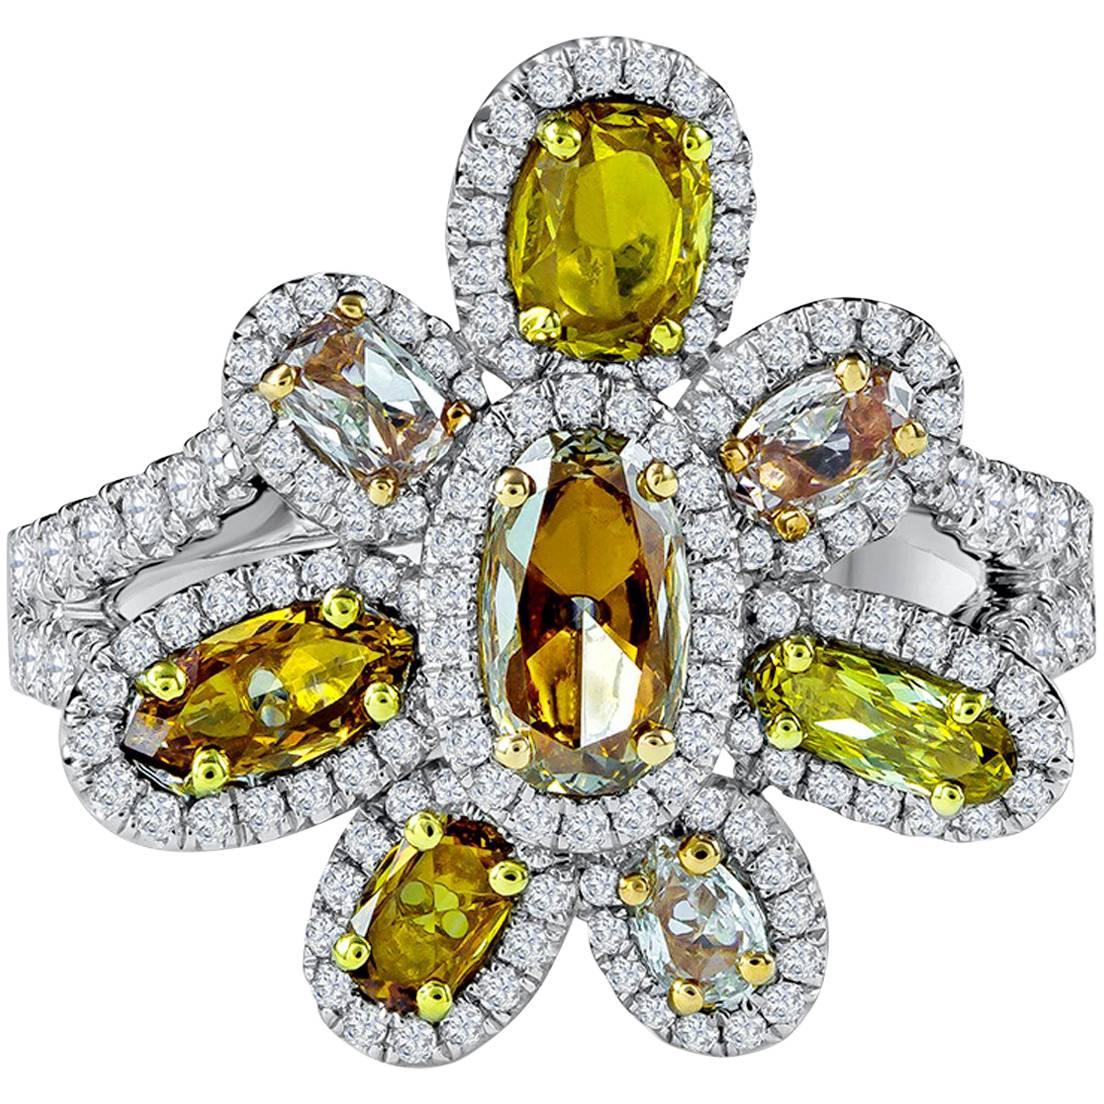 1.36 Carat Total Mixed Cut Fancy Color Gemstone with Diamond Flower Ring For Sale